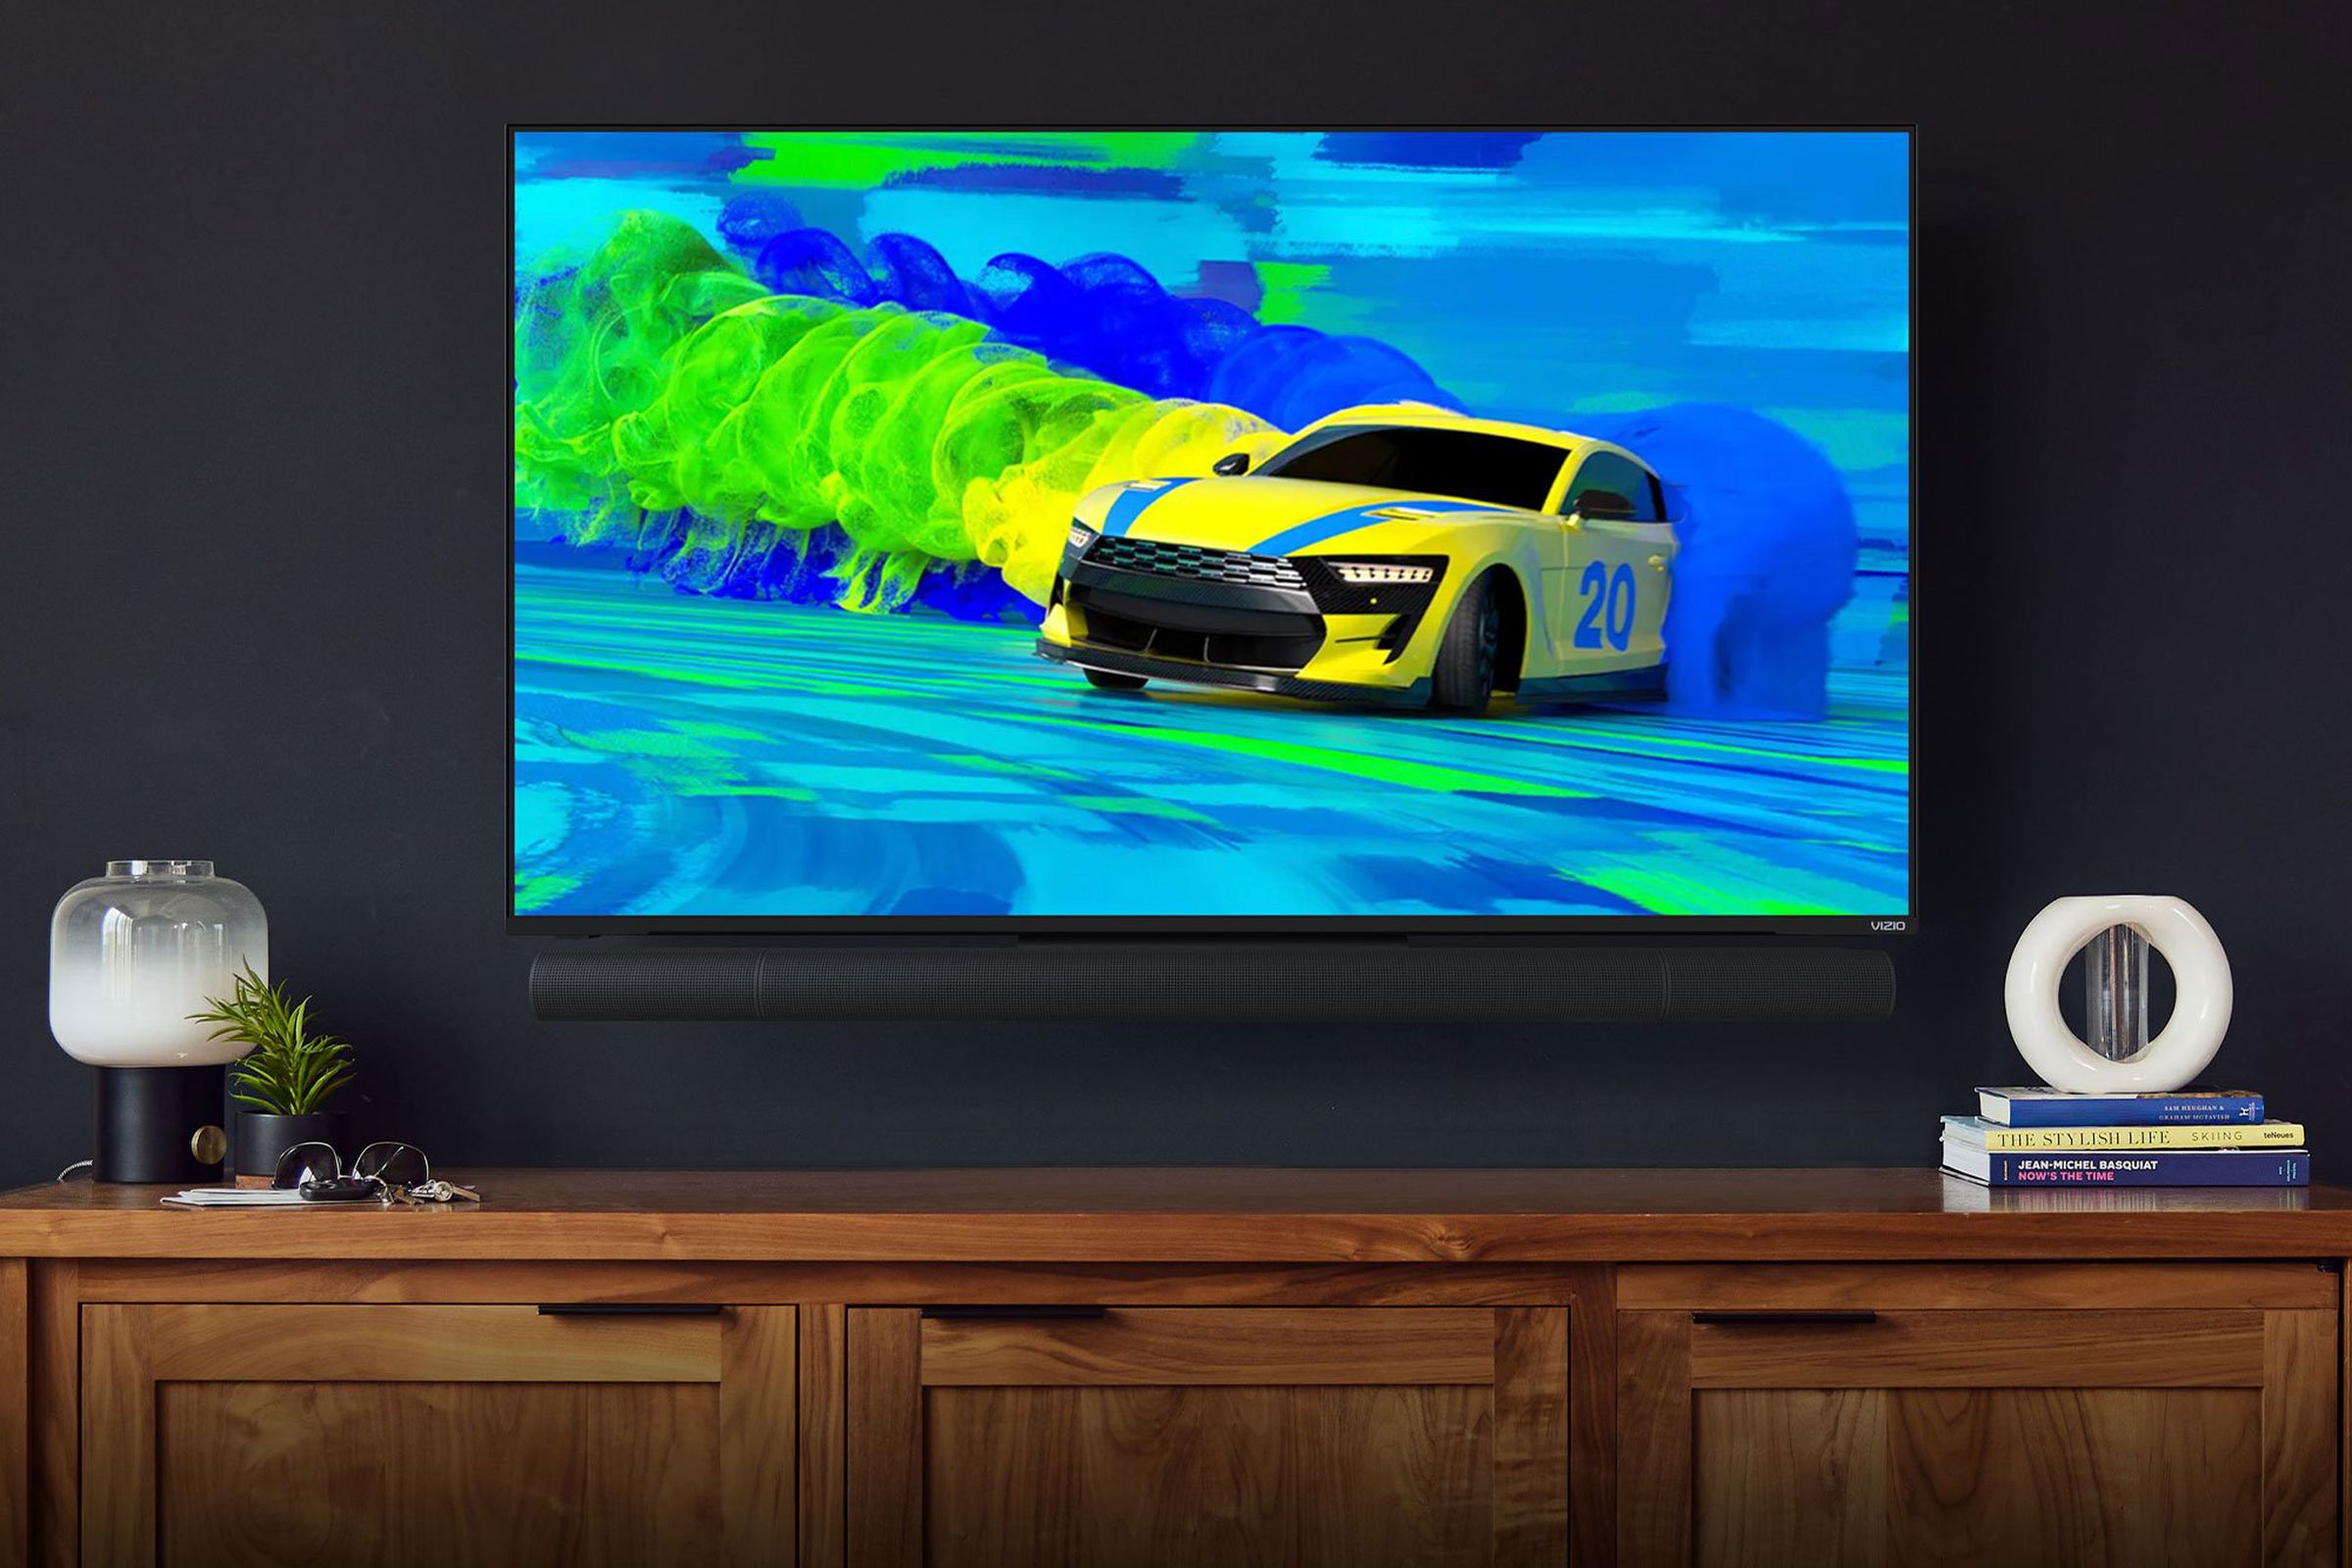 The Vizio M7 Series has a bunch of gamer-friendly features, including support for AMD FreeSync and a variable refresh rate.